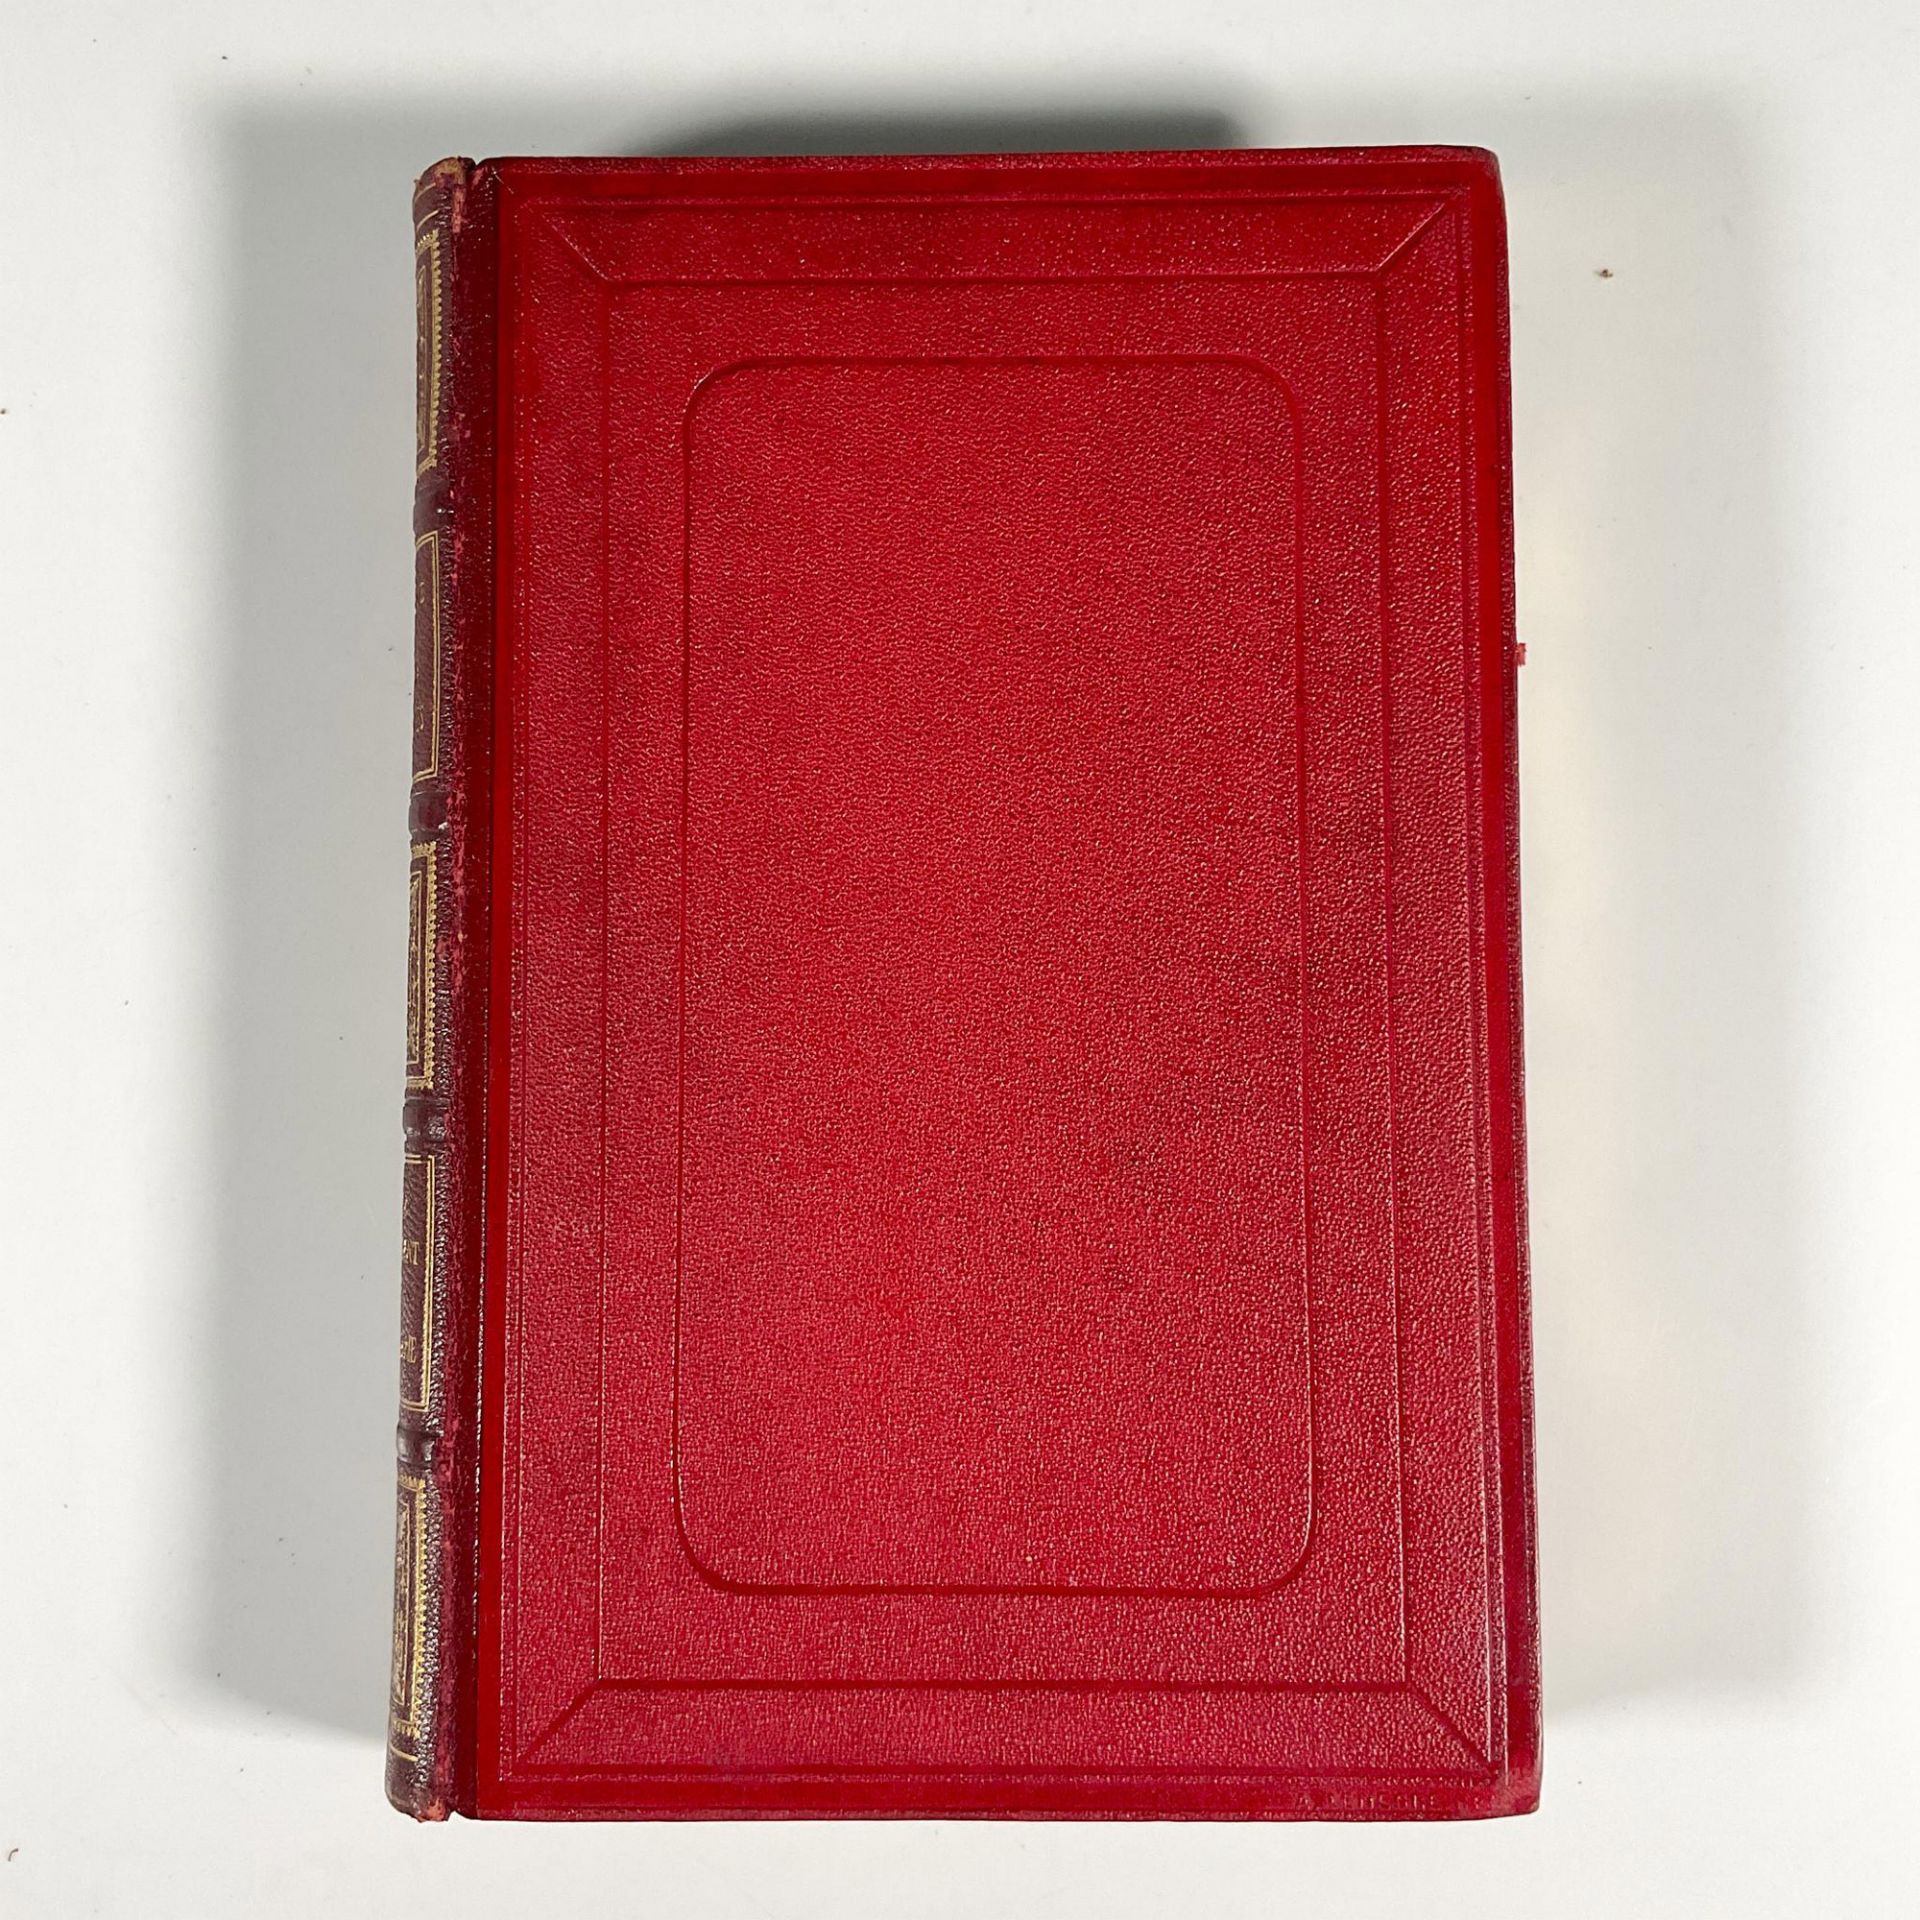 Jules Verne, Robur le Conquerant, Aux Harpons, Red Cover - Image 2 of 4